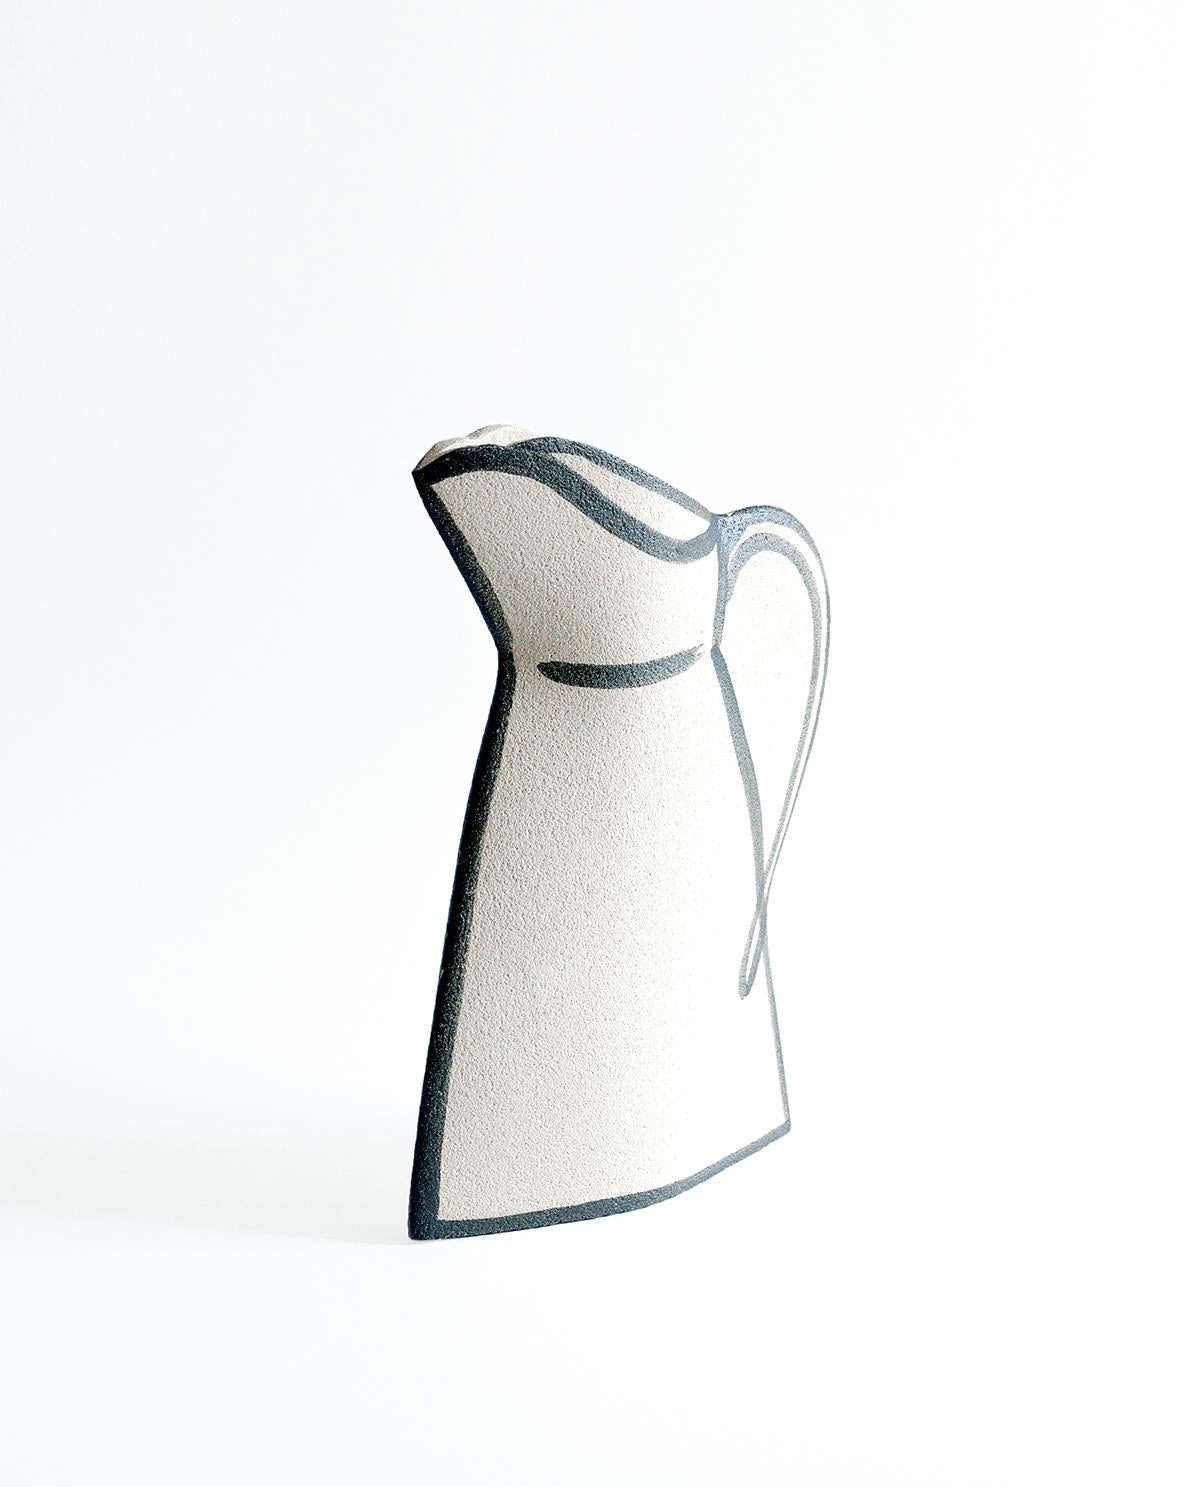 Minimalist 21st Century ‘Morandi Pitcher - Black’, in White Ceramic, Hand-Crafted in France For Sale